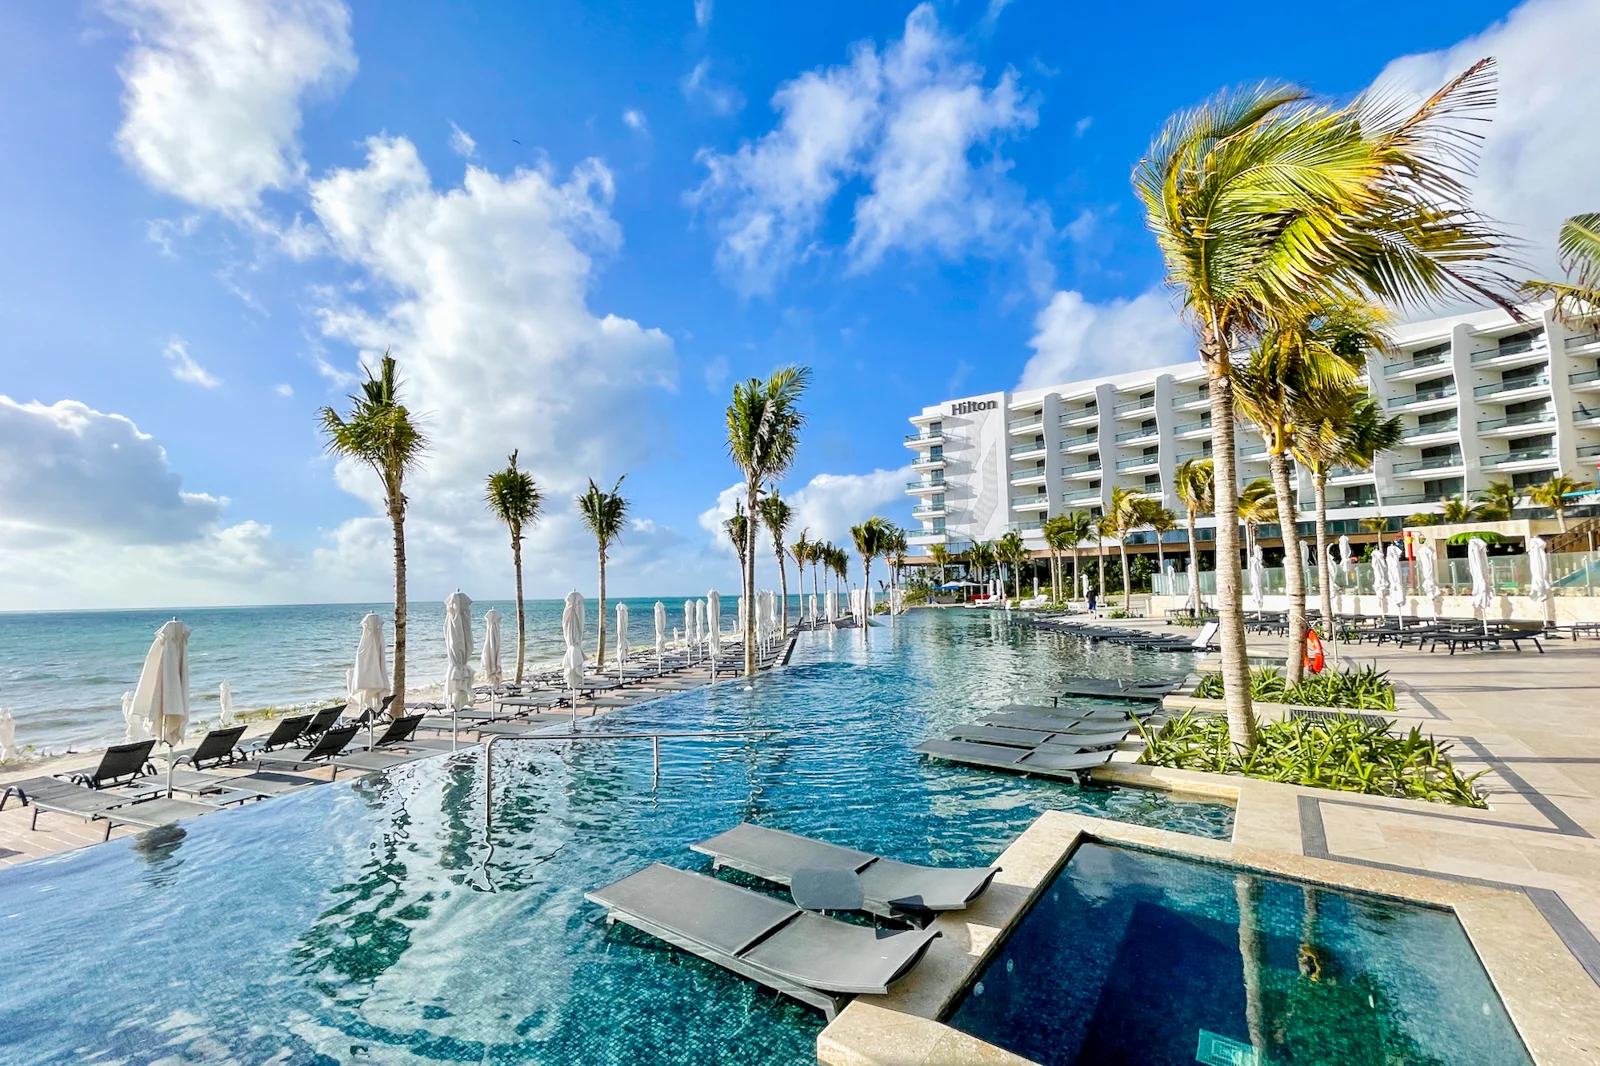 New All-Inclusive Resorts in Mexico & the Caribbean